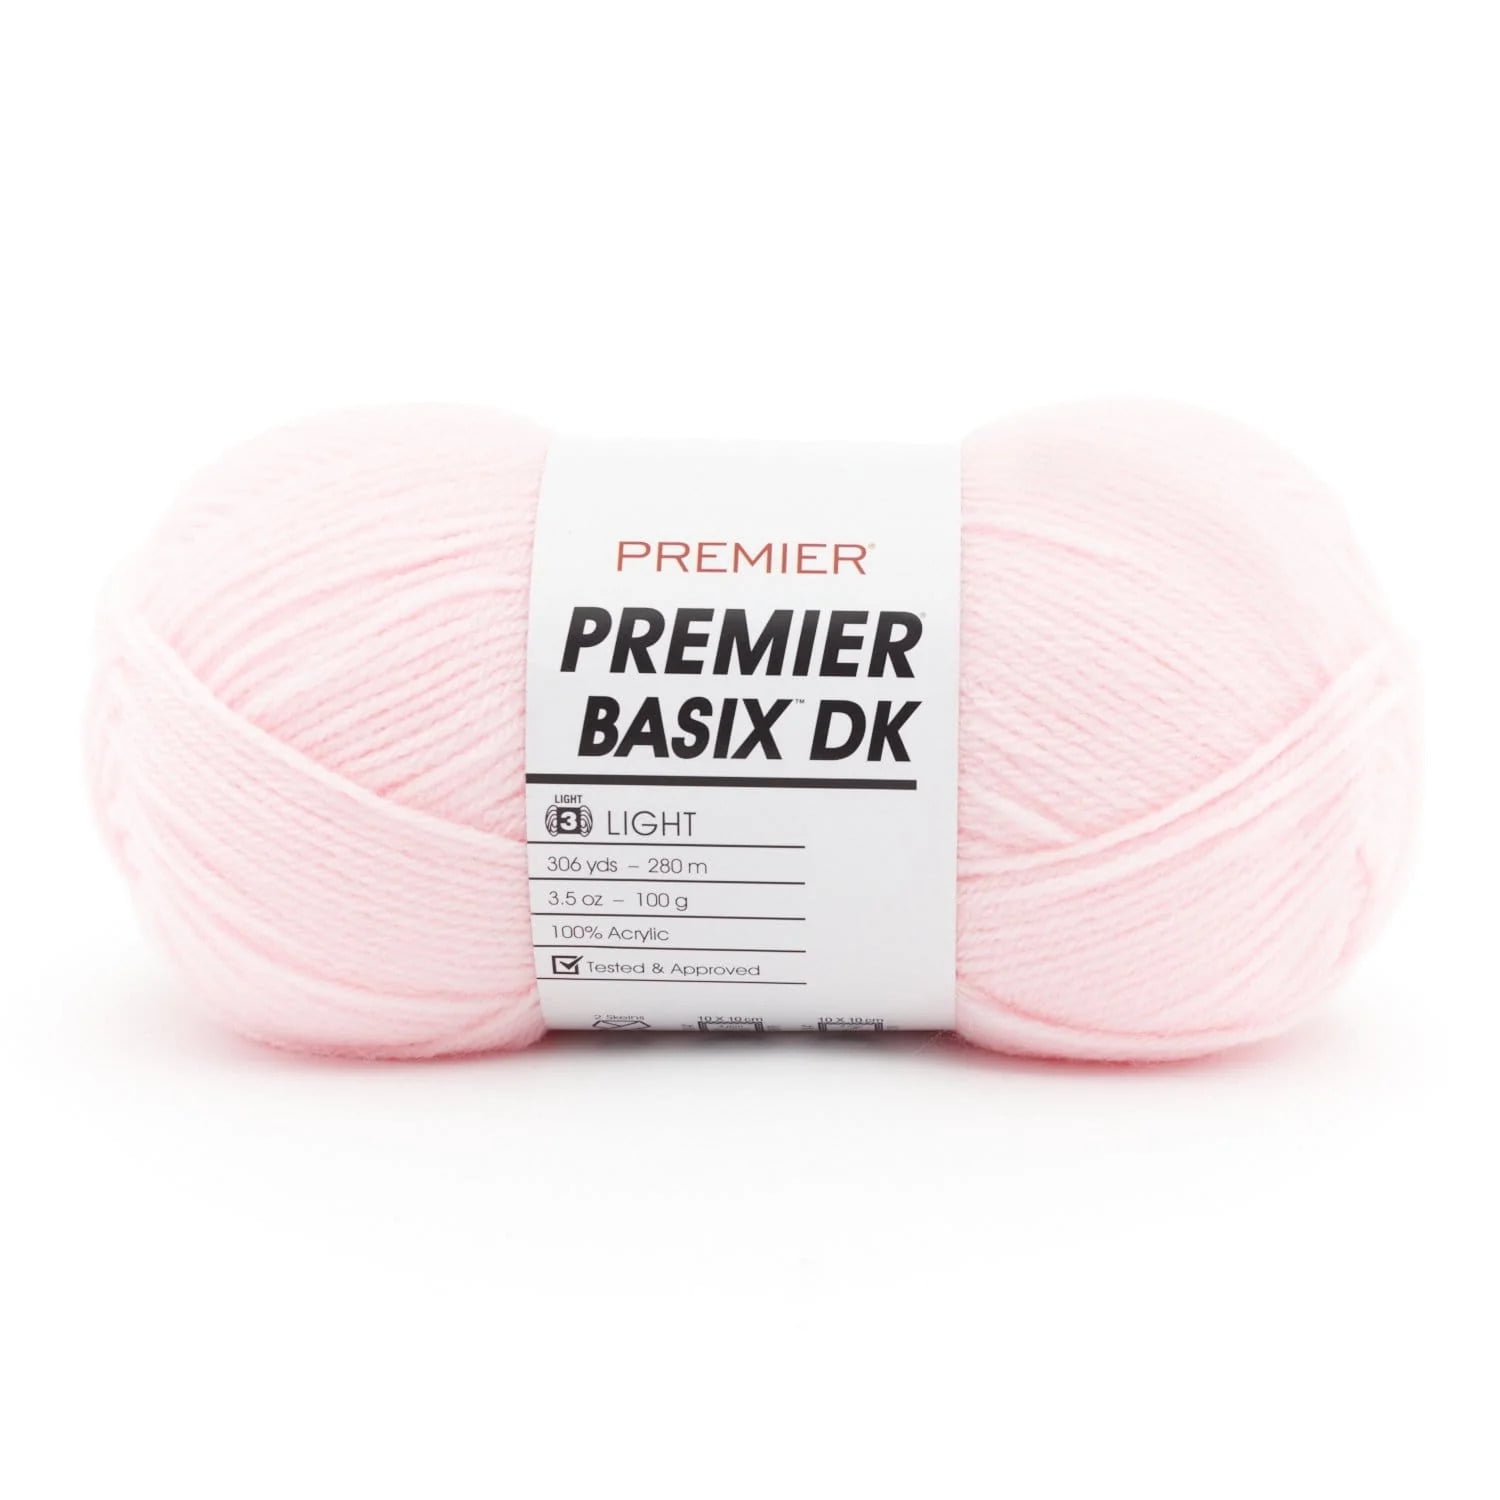 Premier Yarns Basix, Solid Worsted Yarn, Made of Acrylic, Ideal Yarn for  Crocheting and Knitting, Taupe, 359 Yards